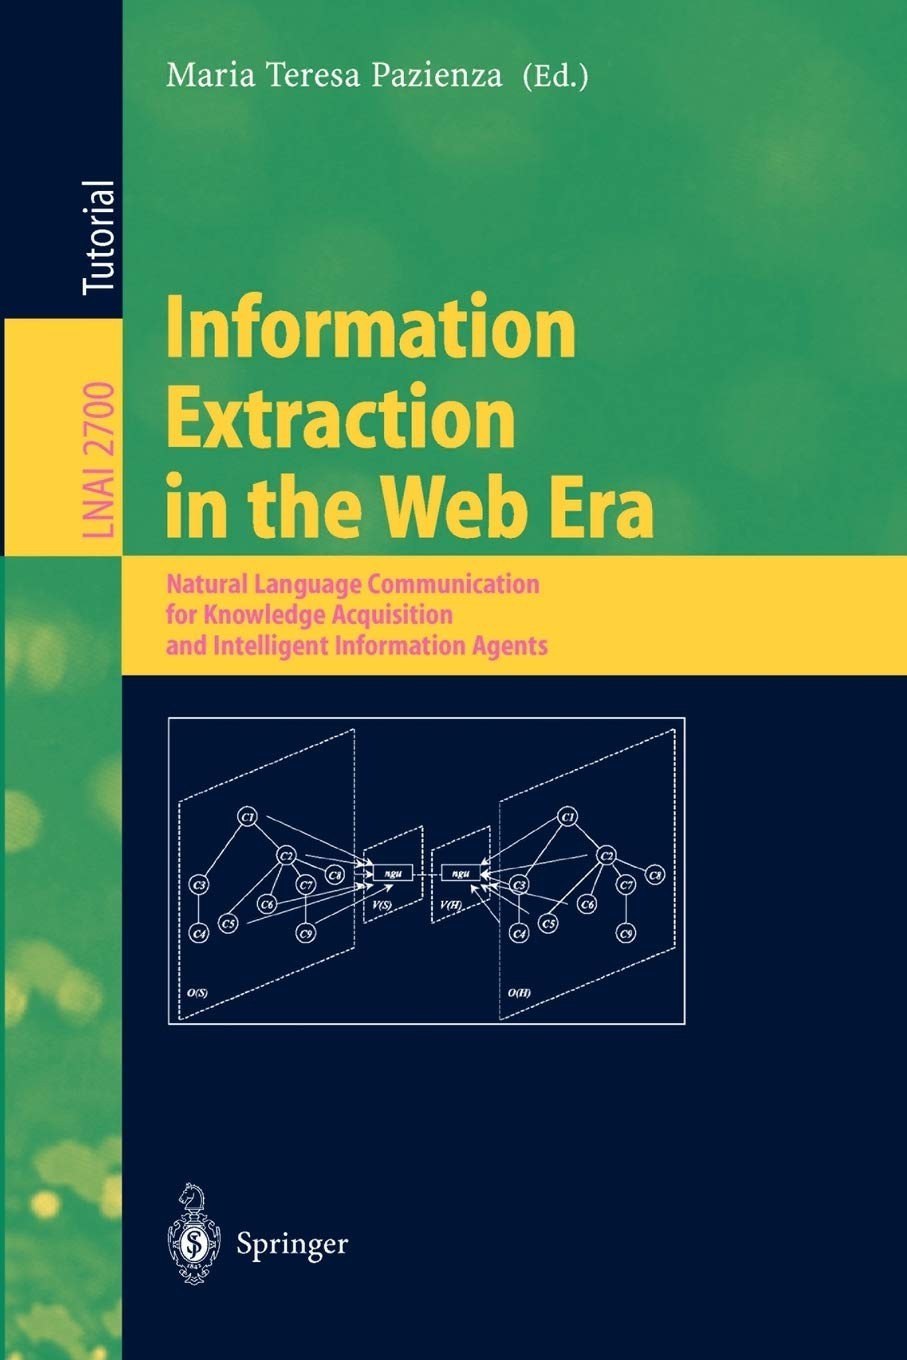 Information Extraction in the Web Era: Natural Language Communication for Knowledge Acquisition and Intelligent Information Agents